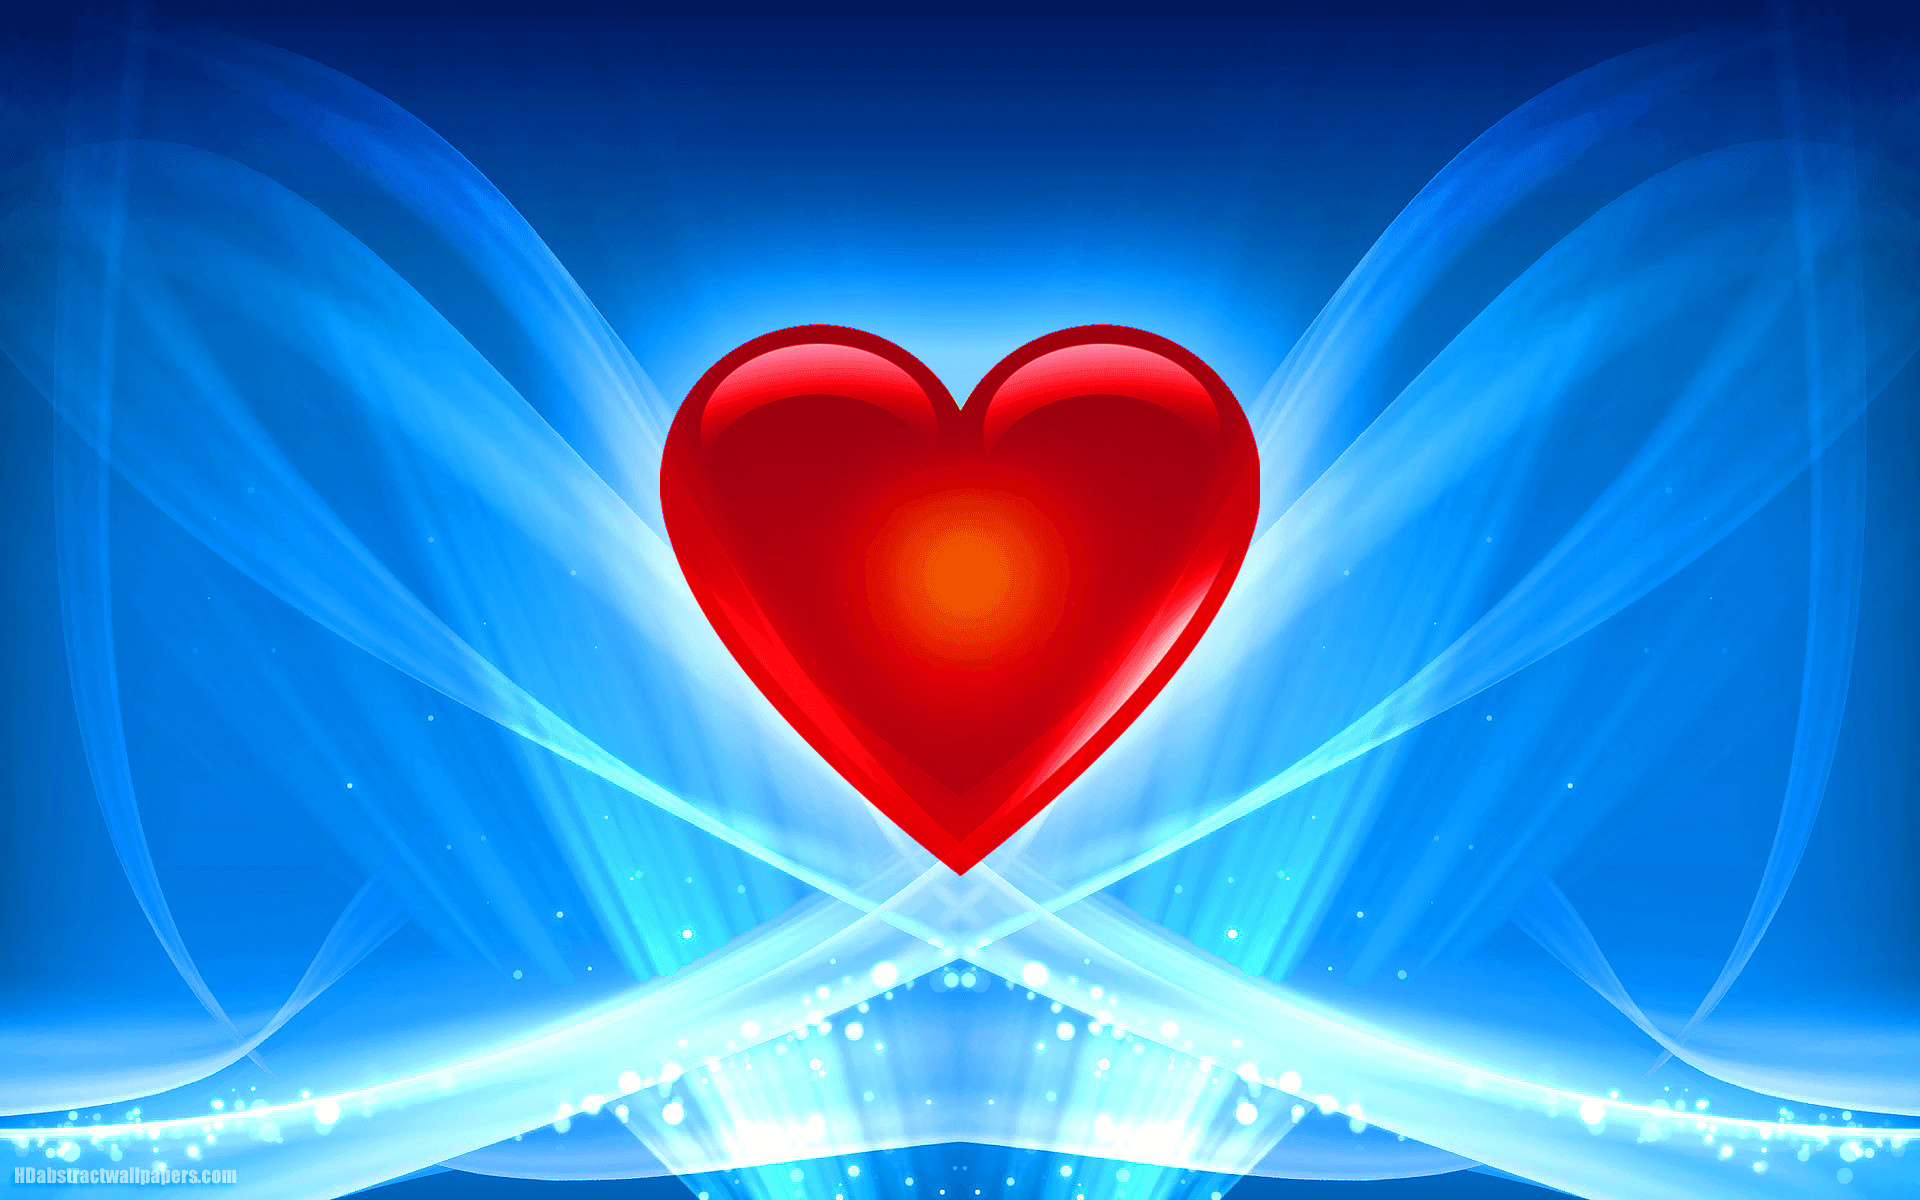 Abstract blue wallpaper with red love heart and lights. A very beautiful blue abstract wallpaper for PC, laptop, tablet or smartphone